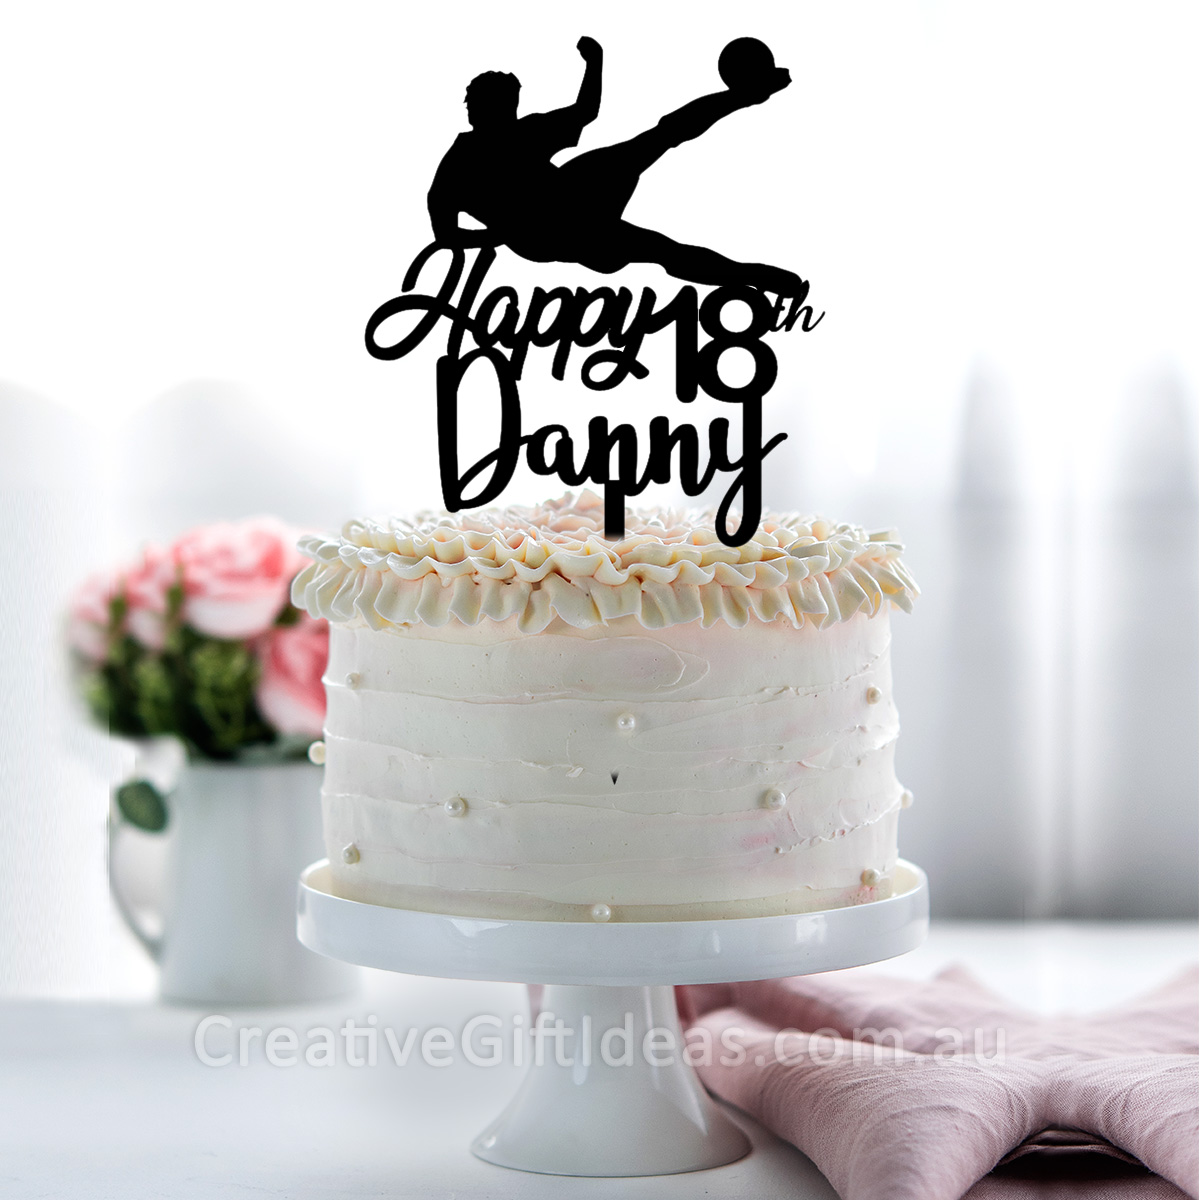 Personalised Soccer Birthday Cake Topper - Creative Gift Ideas